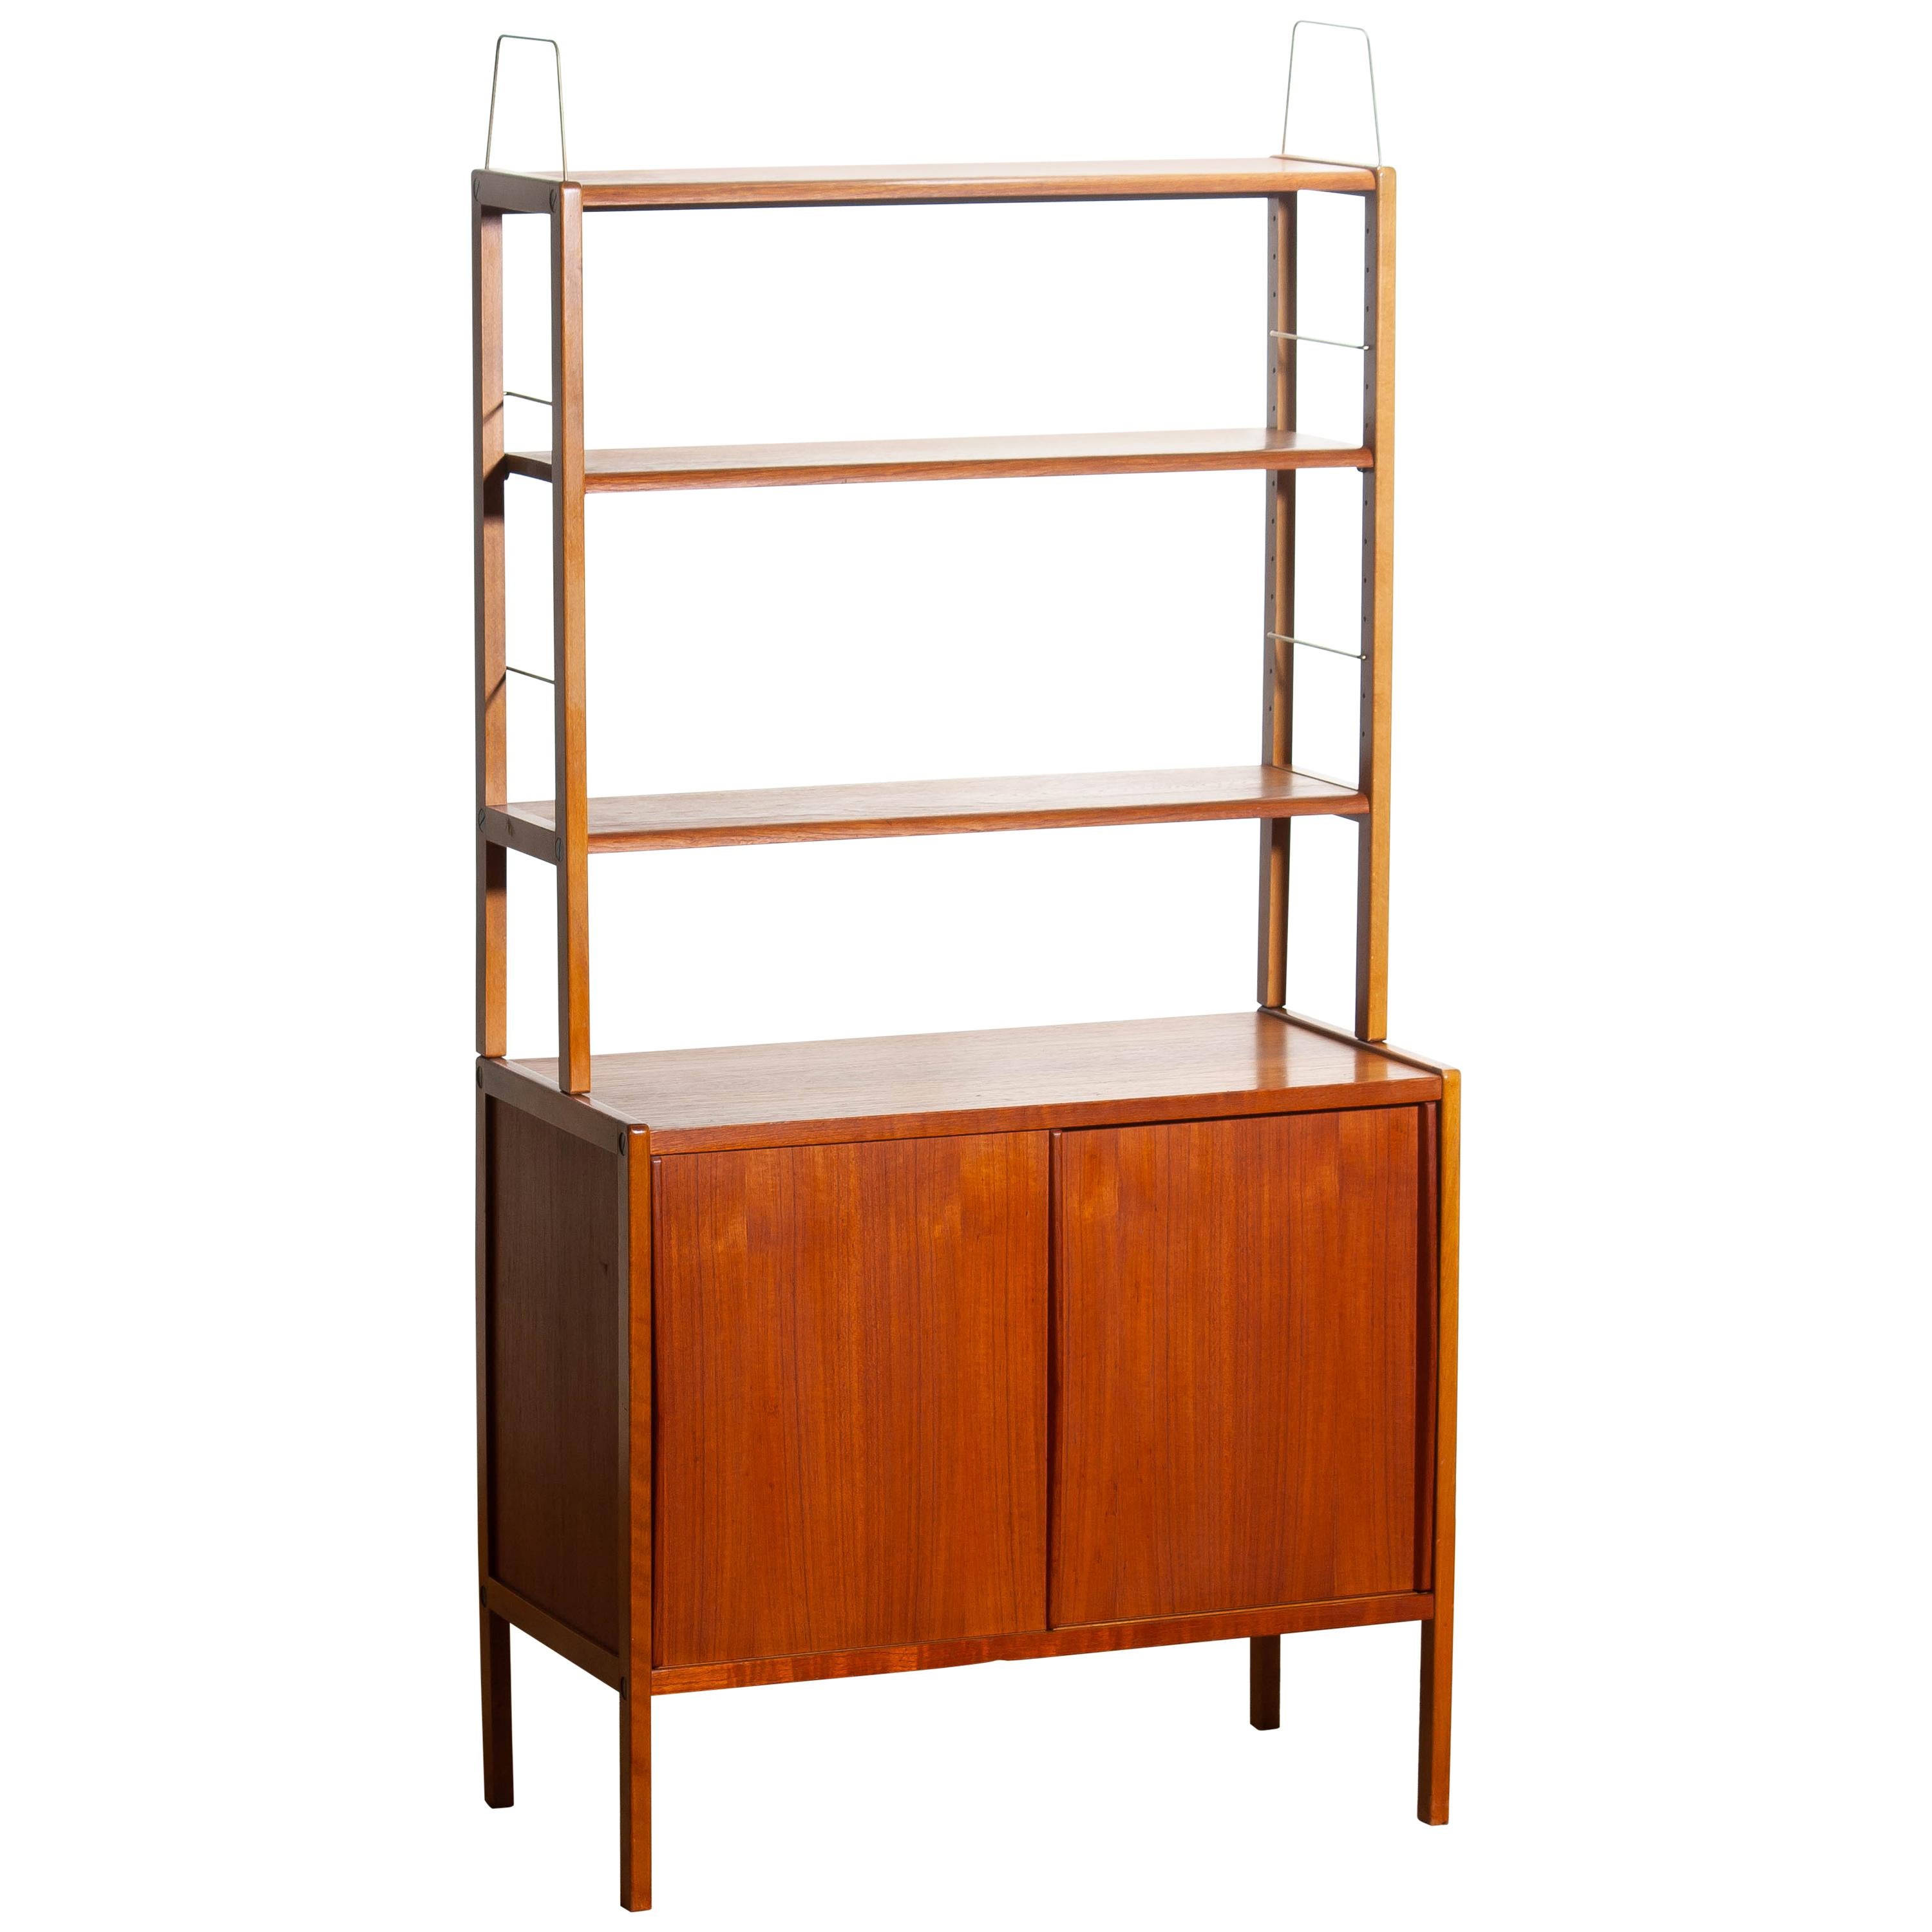 Beautiful and elegant teak bookcase cabinet with brass detail and two sliding doors by Bertil Fridhagen for Bodafors, Sweden, 1960s.

The lower part of the cabinet has two sliding doors and inside the original shelf with burned logo 